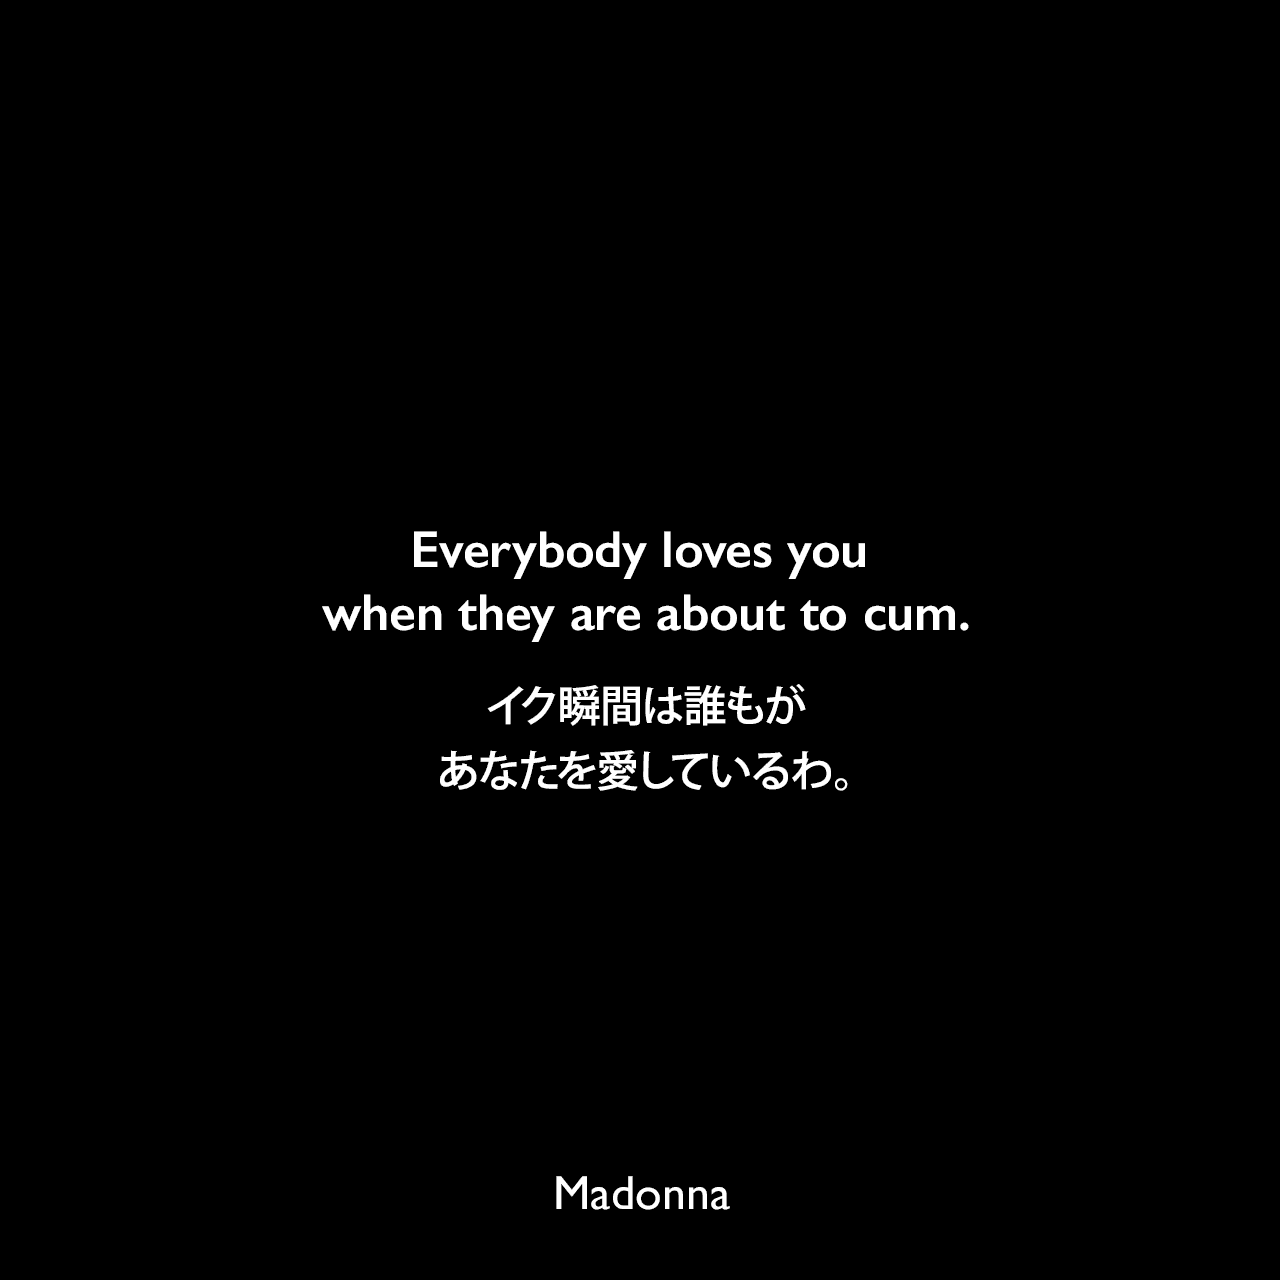 Everybody loves you when they are about to cum.イク瞬間は誰もがあなたを愛しているわ。Madonna